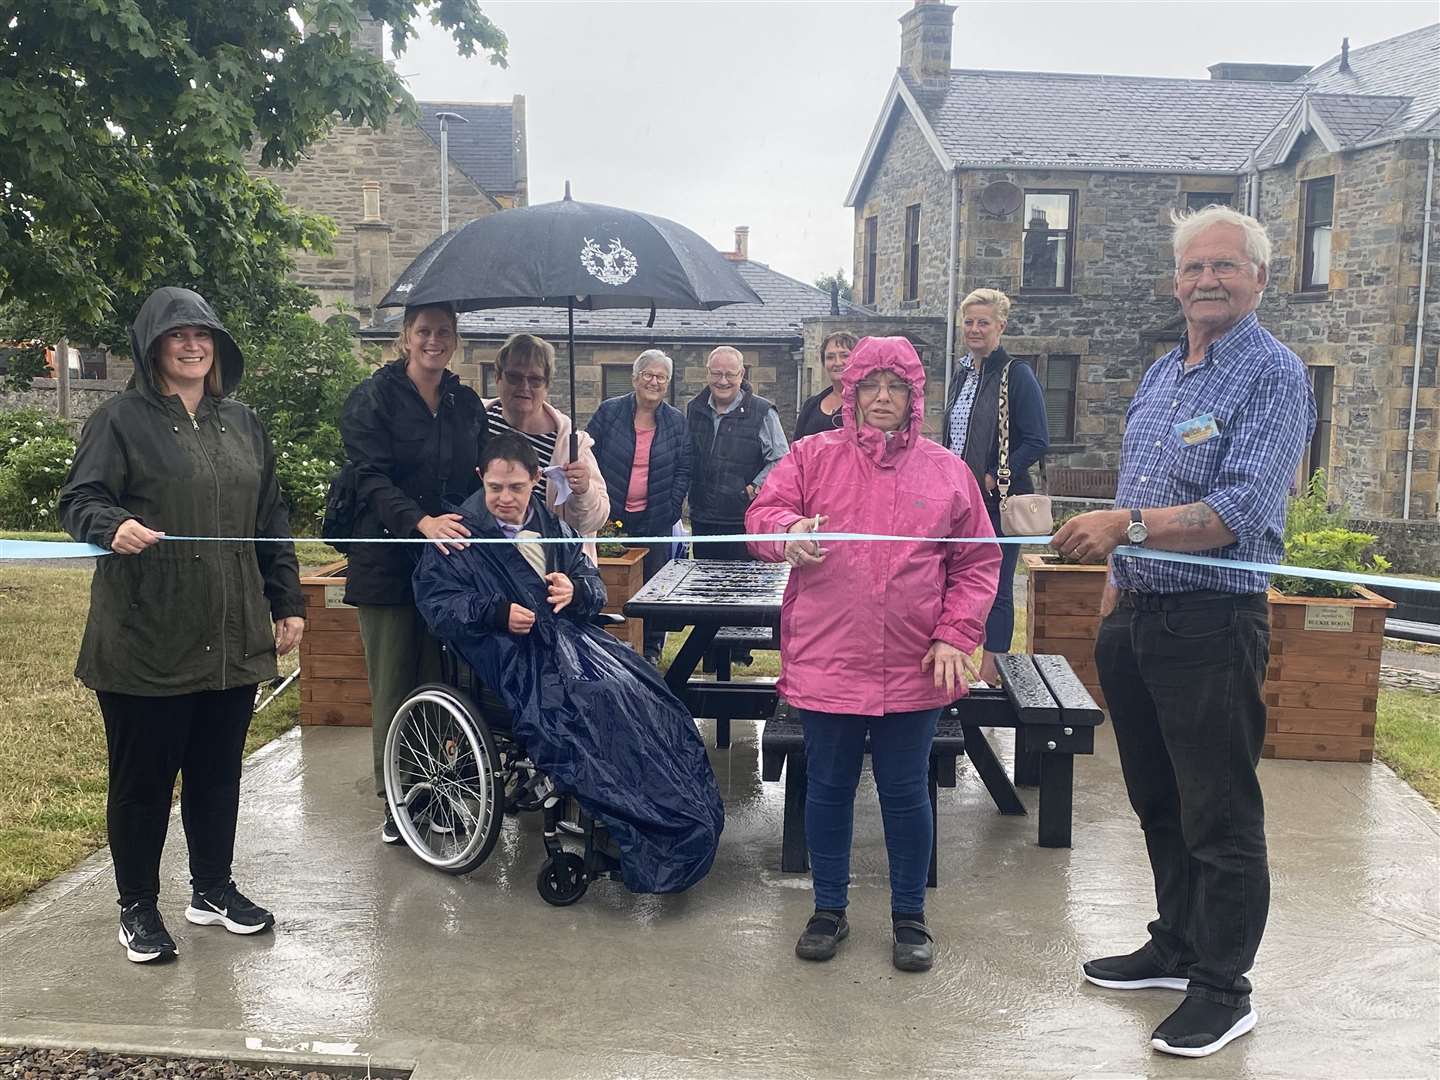 Burnie Centre client Jackie Mainland cuts the ribbon to declare the rest and remembrance area open. She is joined by Buckie's Roots volunteers, and Burnie centre users and carers.